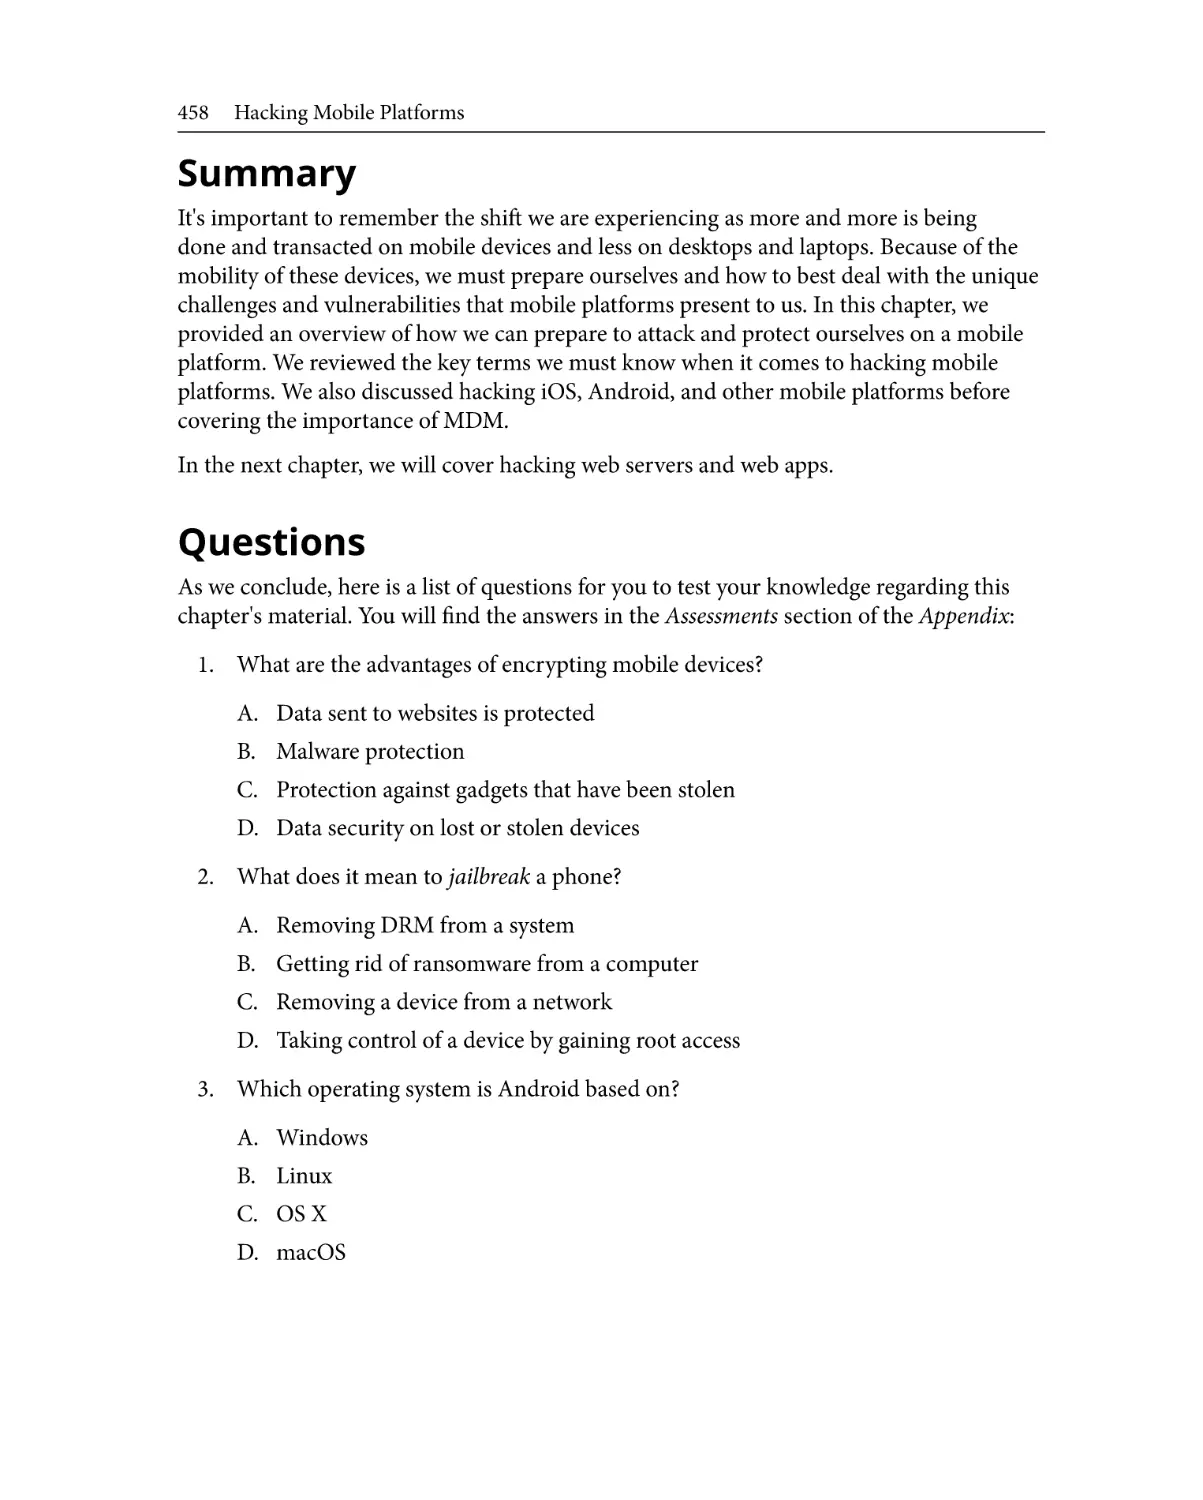 Summary
Questions